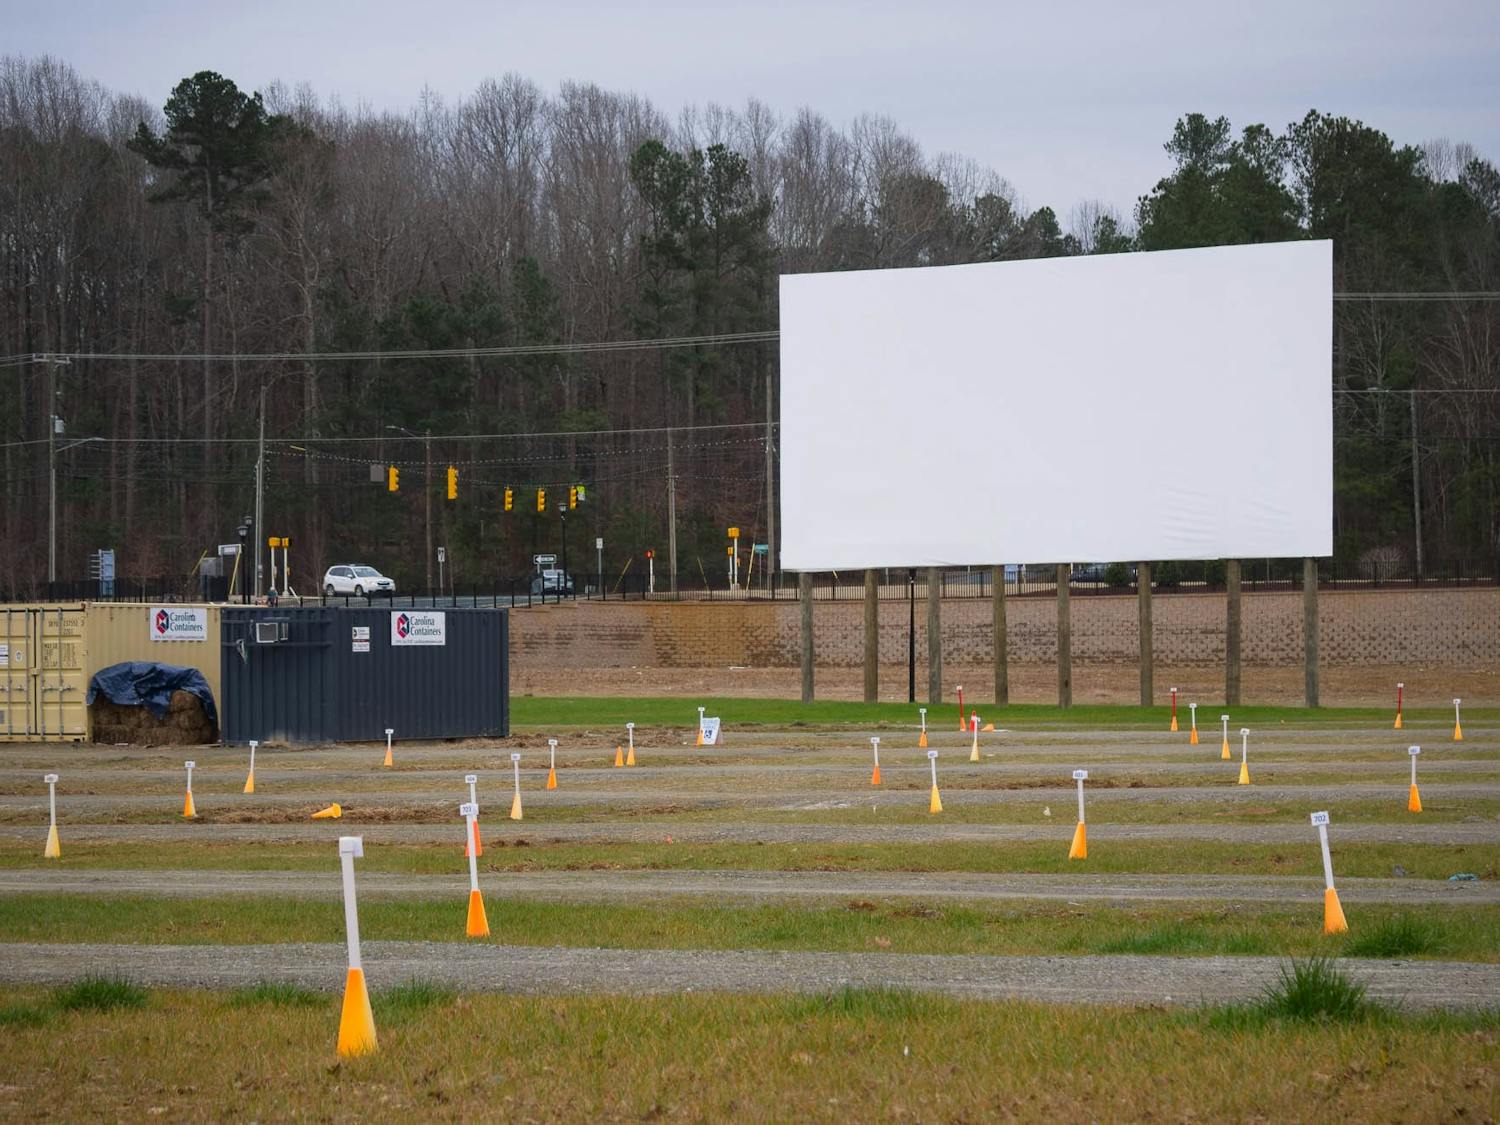 The large screen overlooks parking spots at The Drive-In at Carraway Village on Wednesday, Feb. 10, 2021. The Drive-In features classic movies and special series from Film Fest 919.